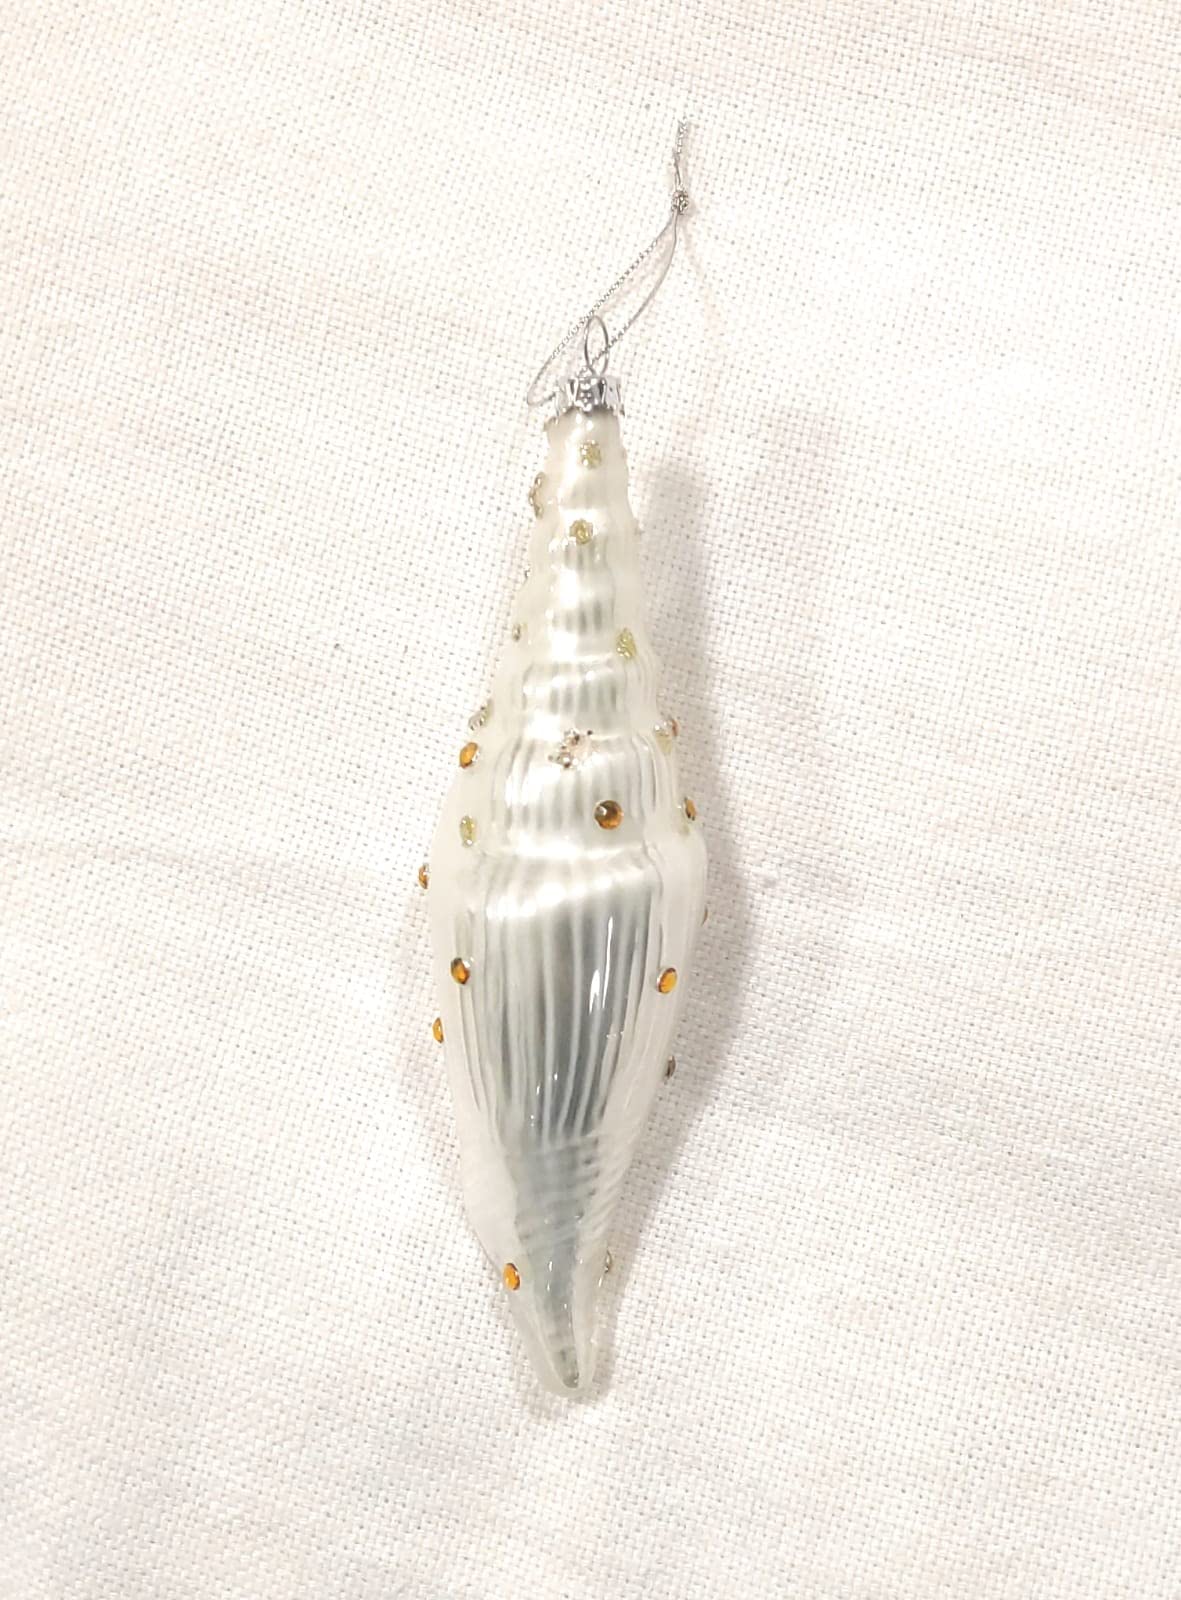 Teardrop Shells - Christmas decorations - set of 2 (gold and pearl white)